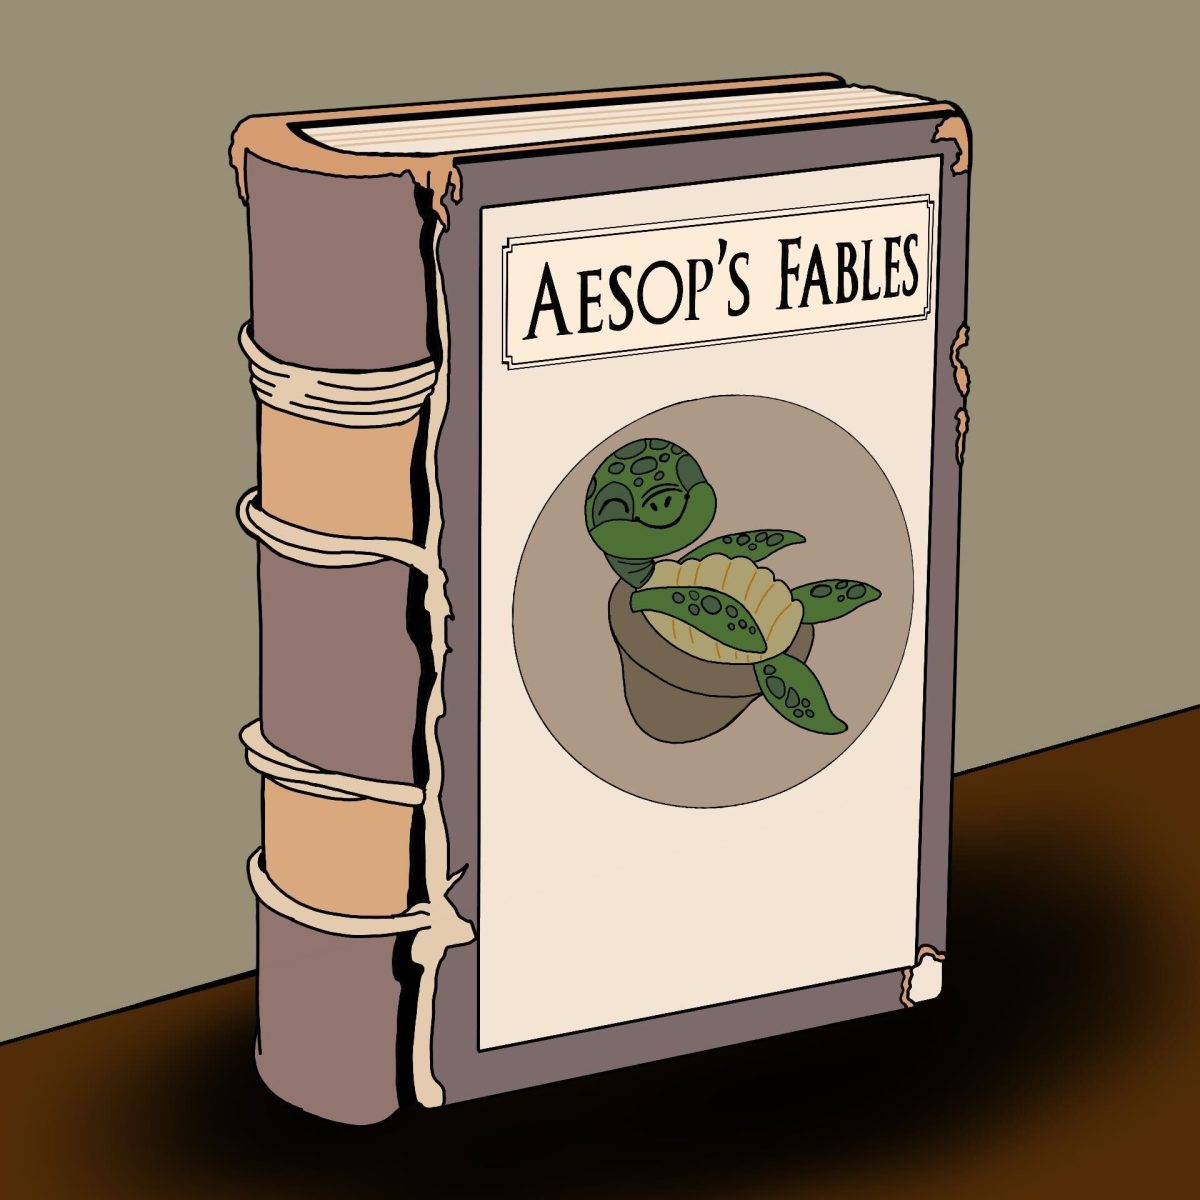 Fables+are+an+accessible+source+of+timeless+lessons